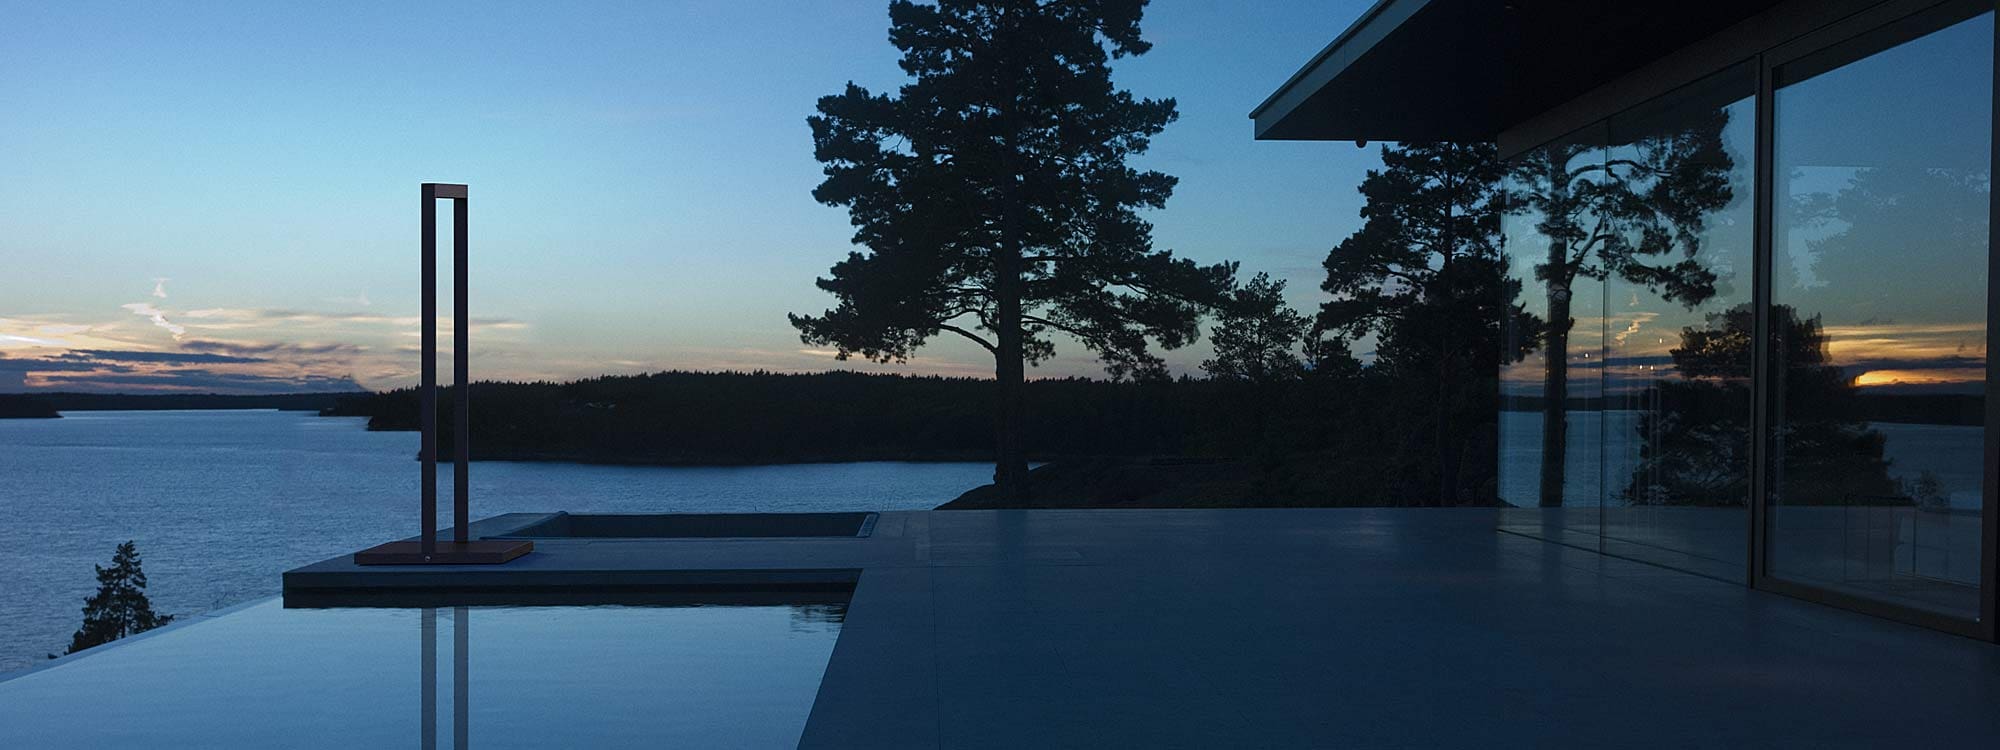 Image at dusk of Roshults modern garden shower on terrace, with lakes and woodland in the background